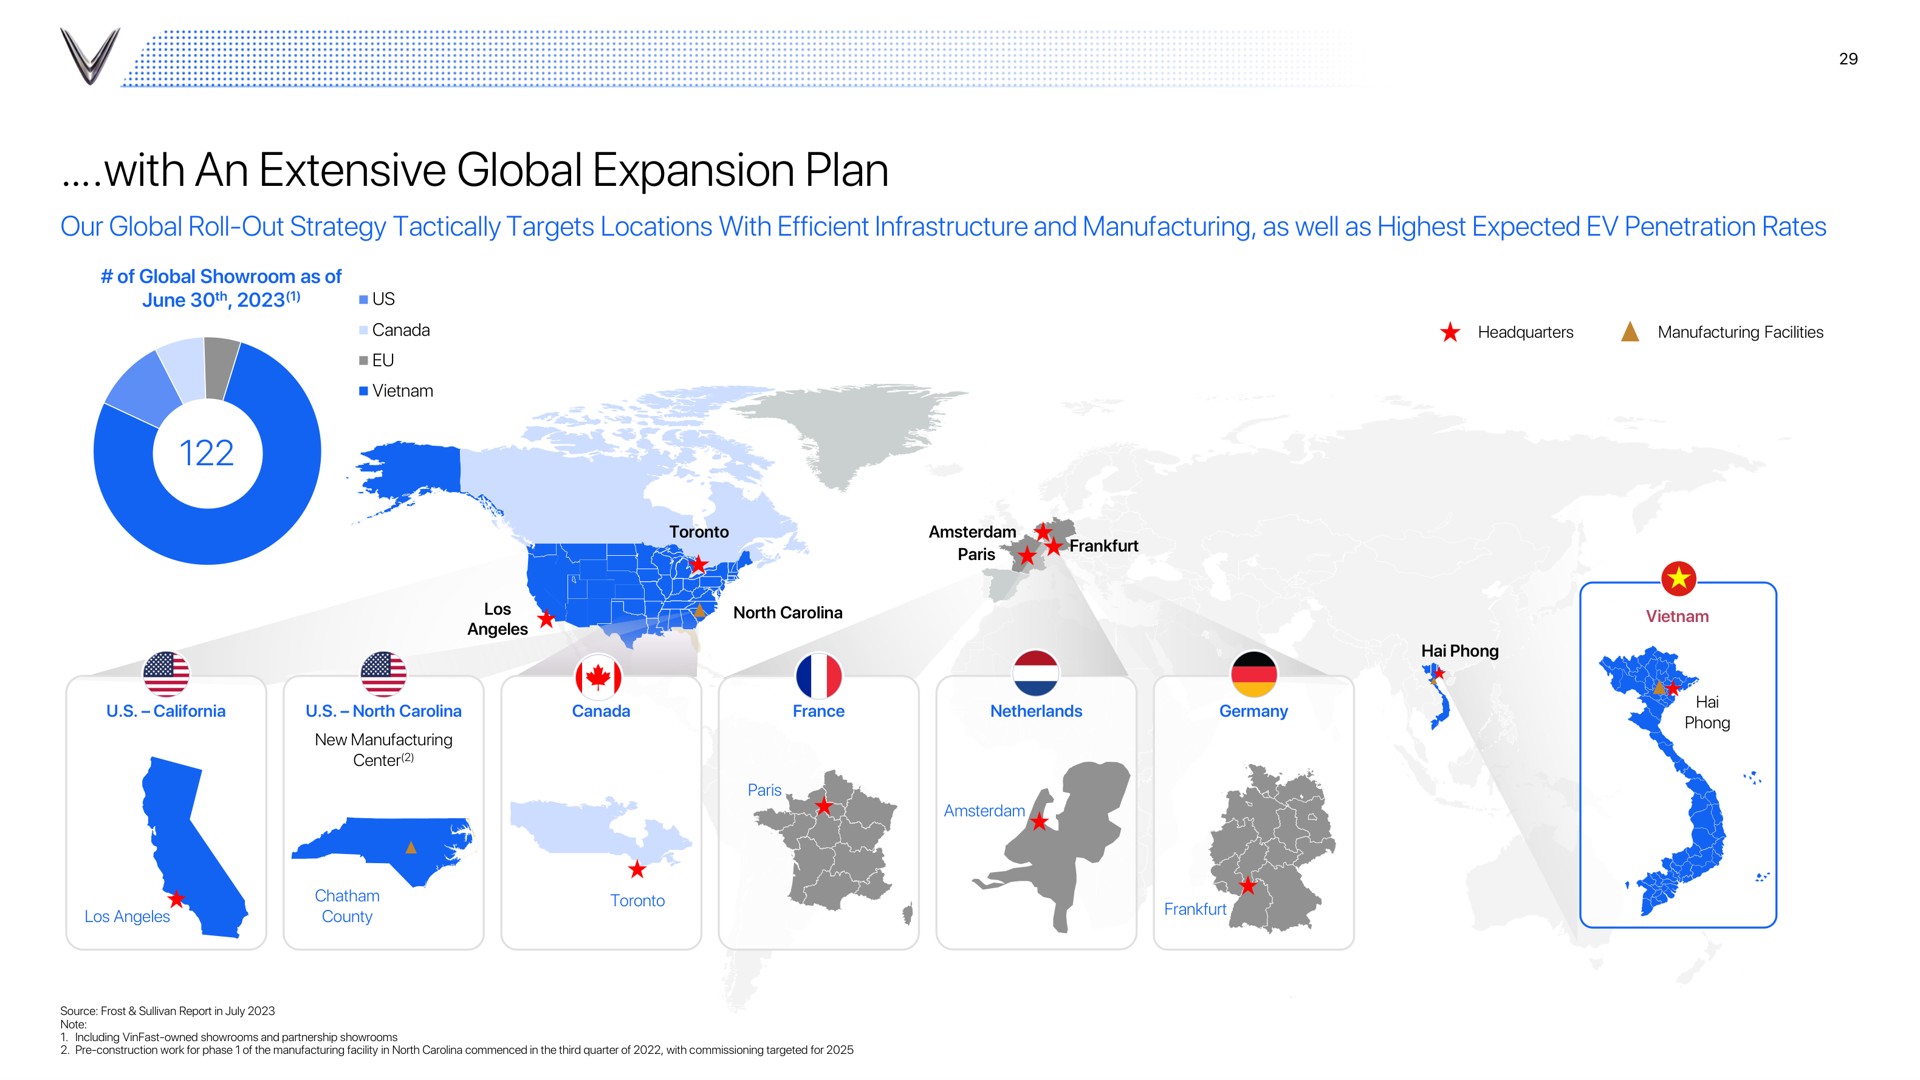 with an extensive global expansion plan | VinFast